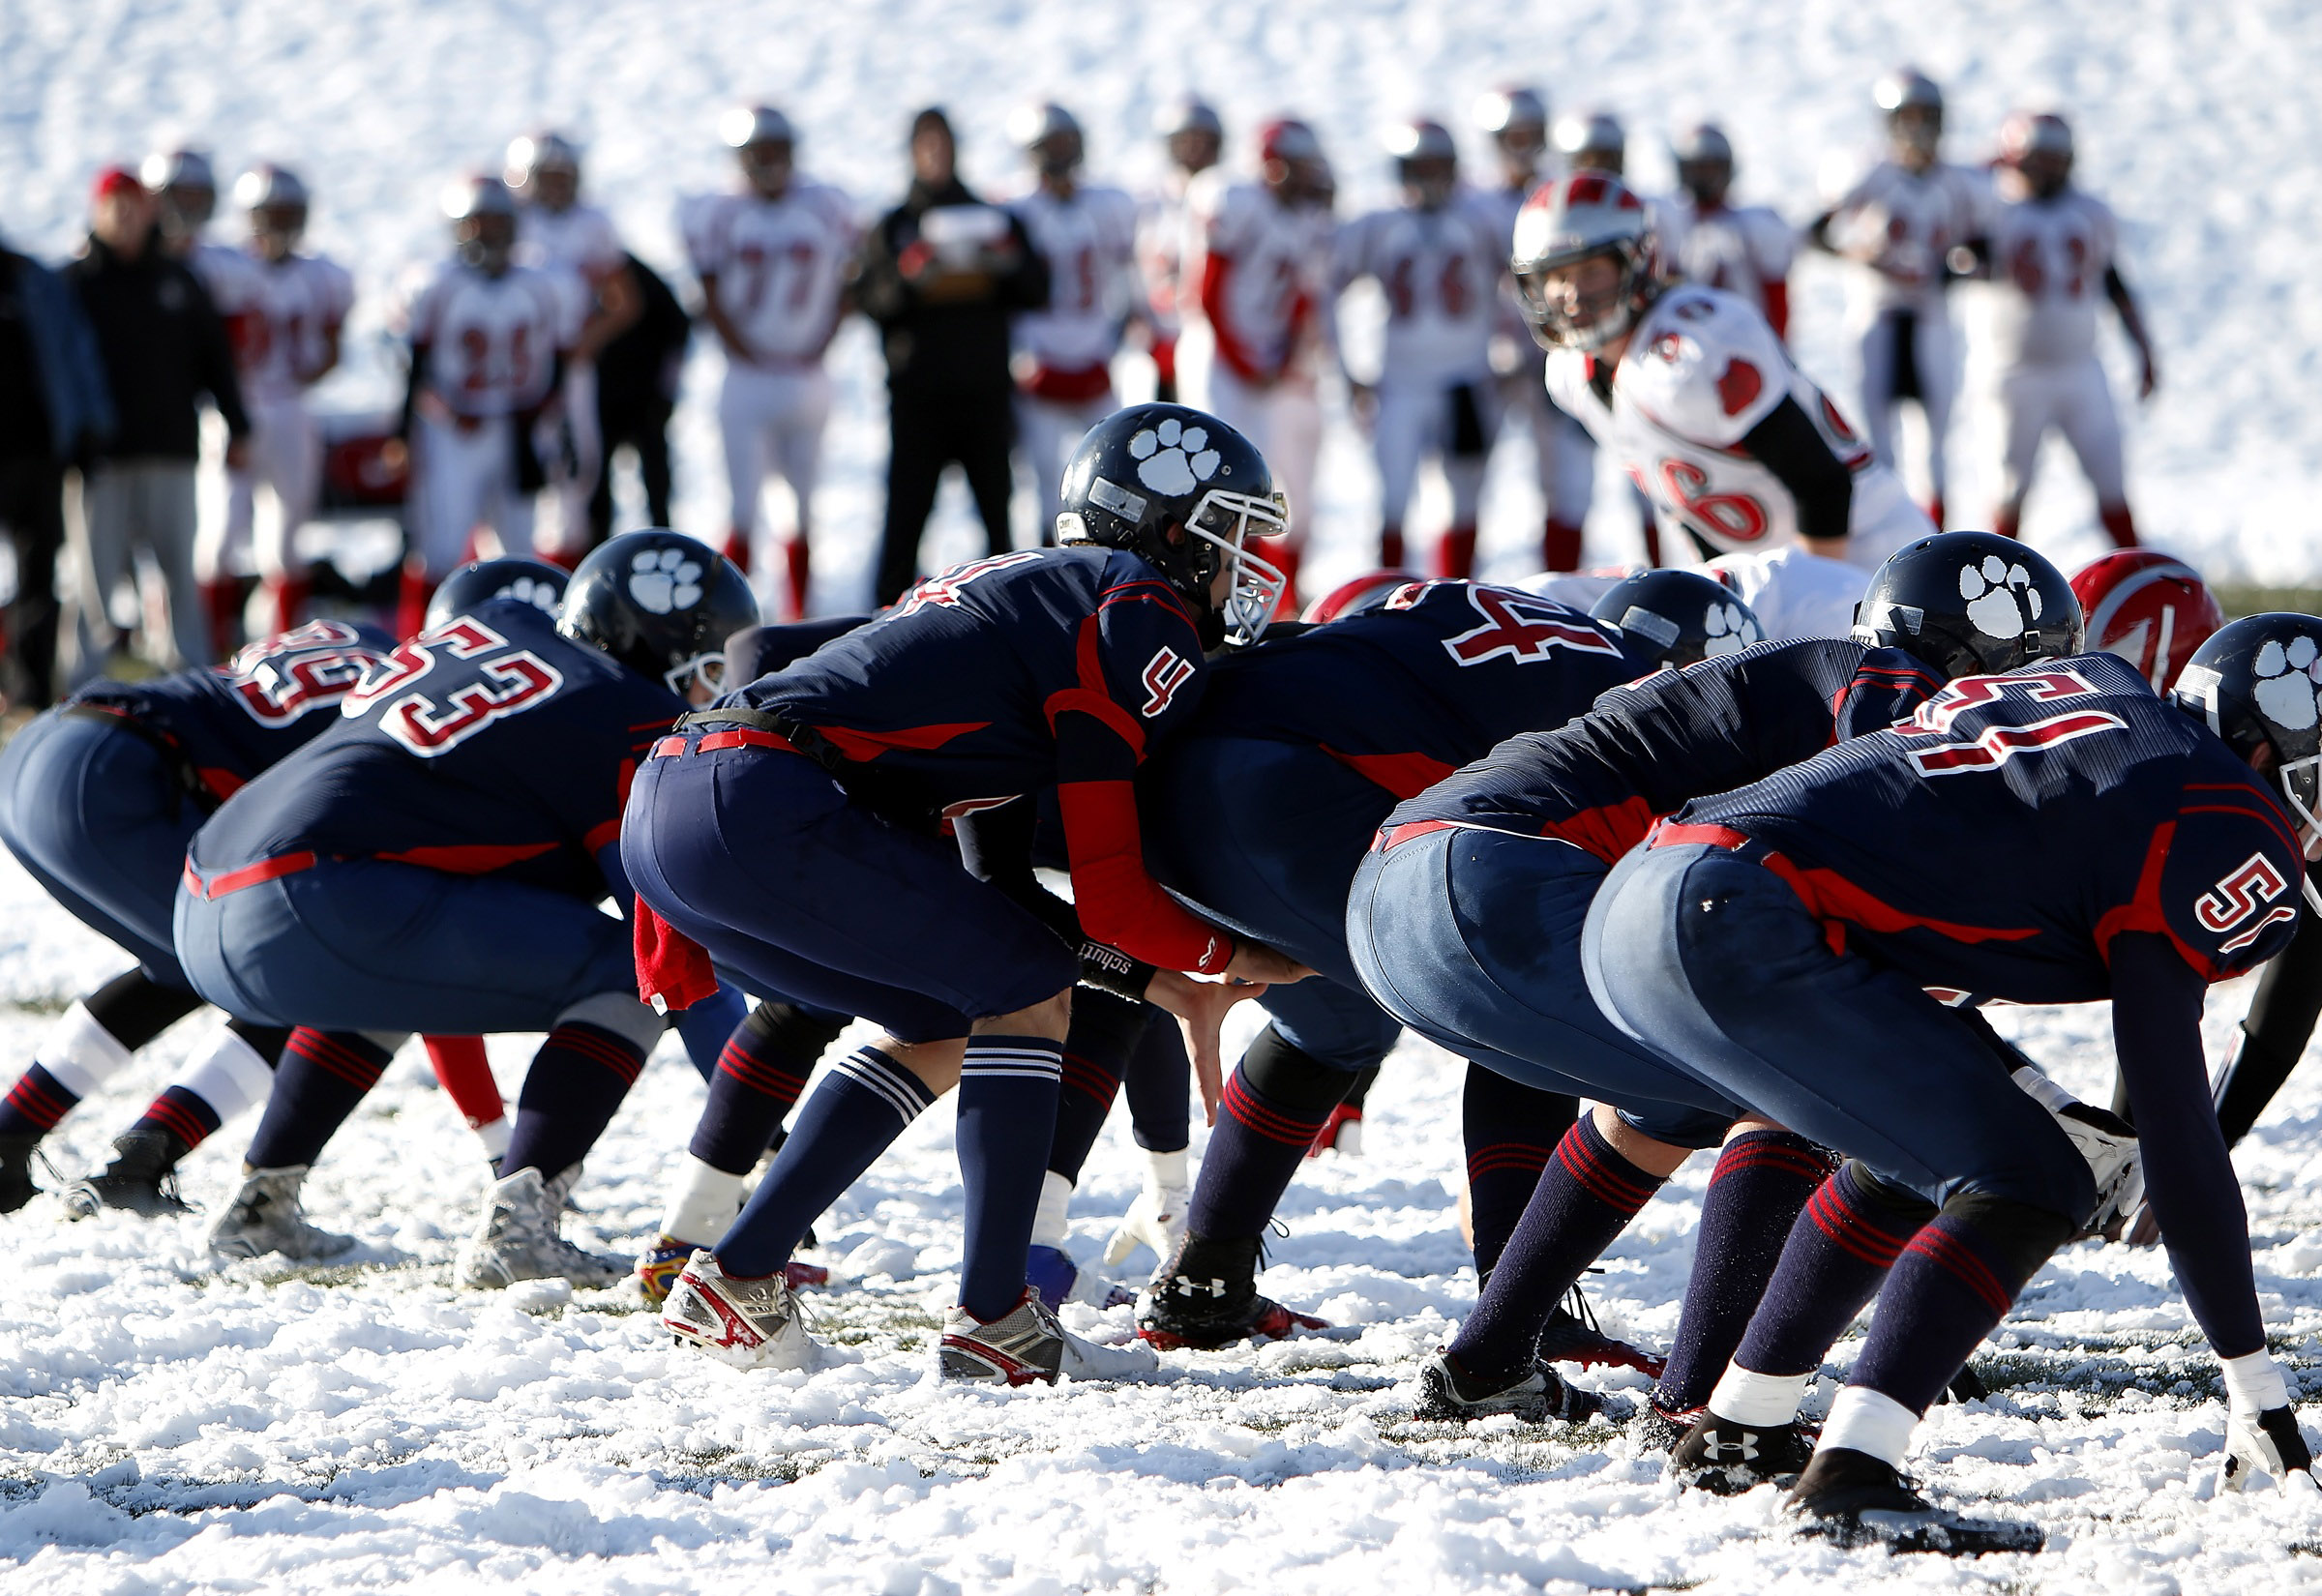 American Football Team playing in the snow image - Free stock photo ...